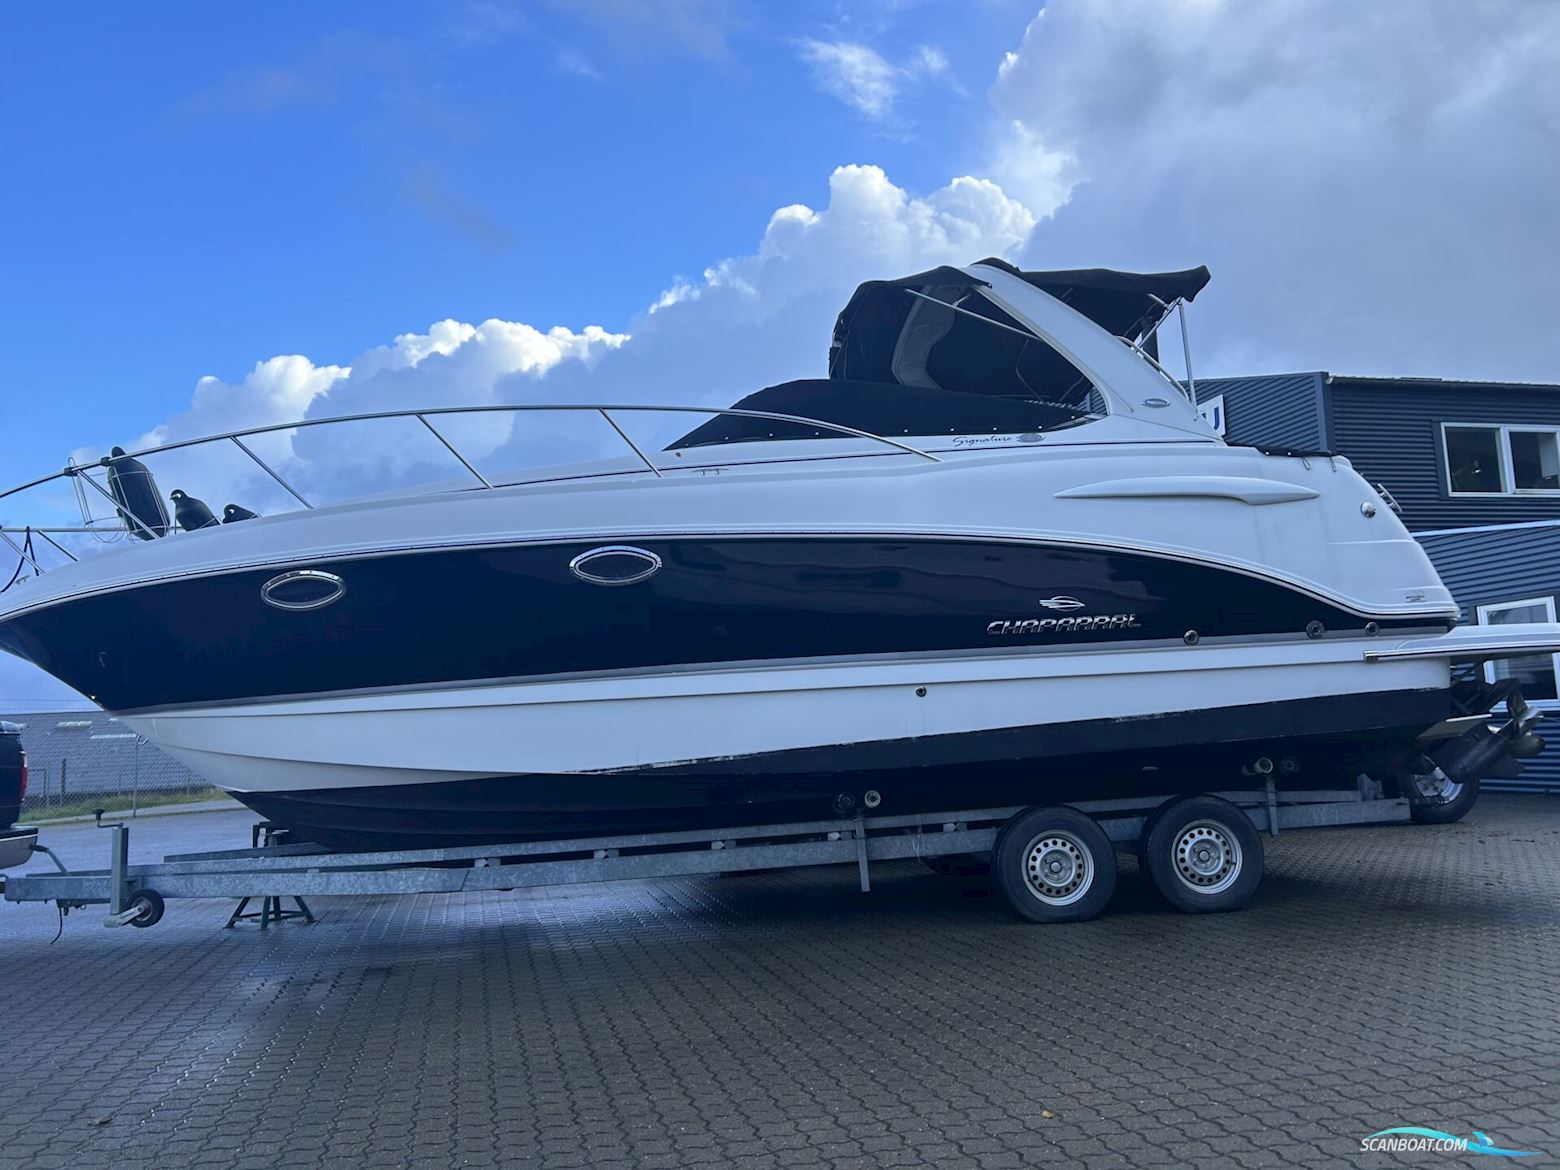 Chaparral 290 Signature Motor boat 2006, with Volvo Penta engine, Denmark